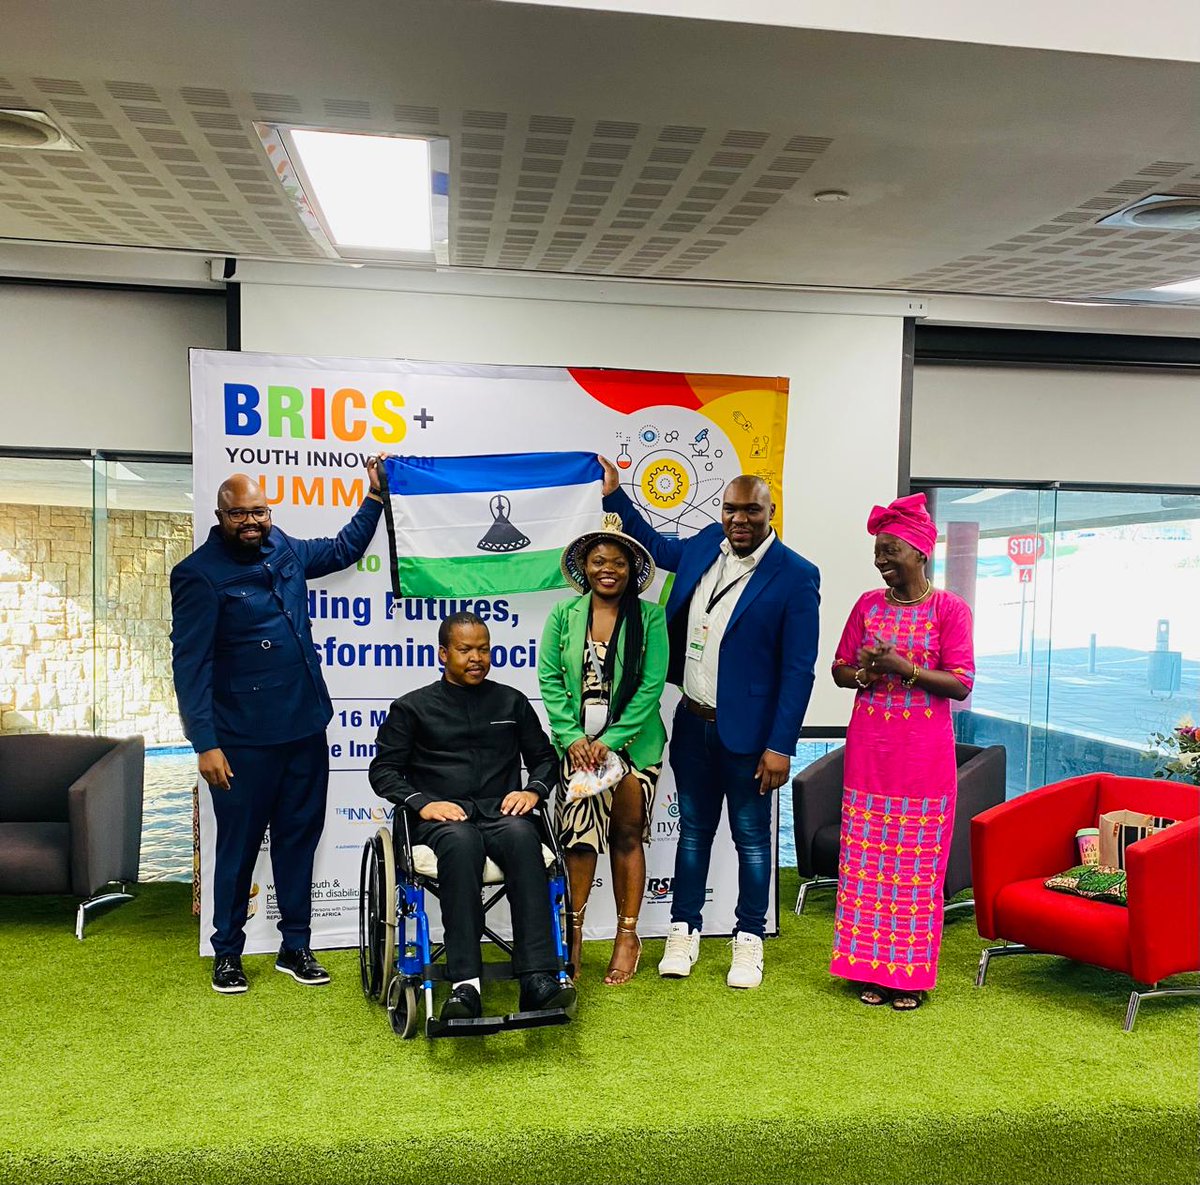 Lesotho shines at the BRICS+ Youth Summit in South Africa! 🏆 Nthomeng Leuta secures 1st place for Sustainable Development, and Selloane Motsamai wins 2nd place in Green Innovation for Inclusive Innovation. 🌍✨ #BRICS2024 #SustainableDevelopment #GreenInnovation #LesothoPride